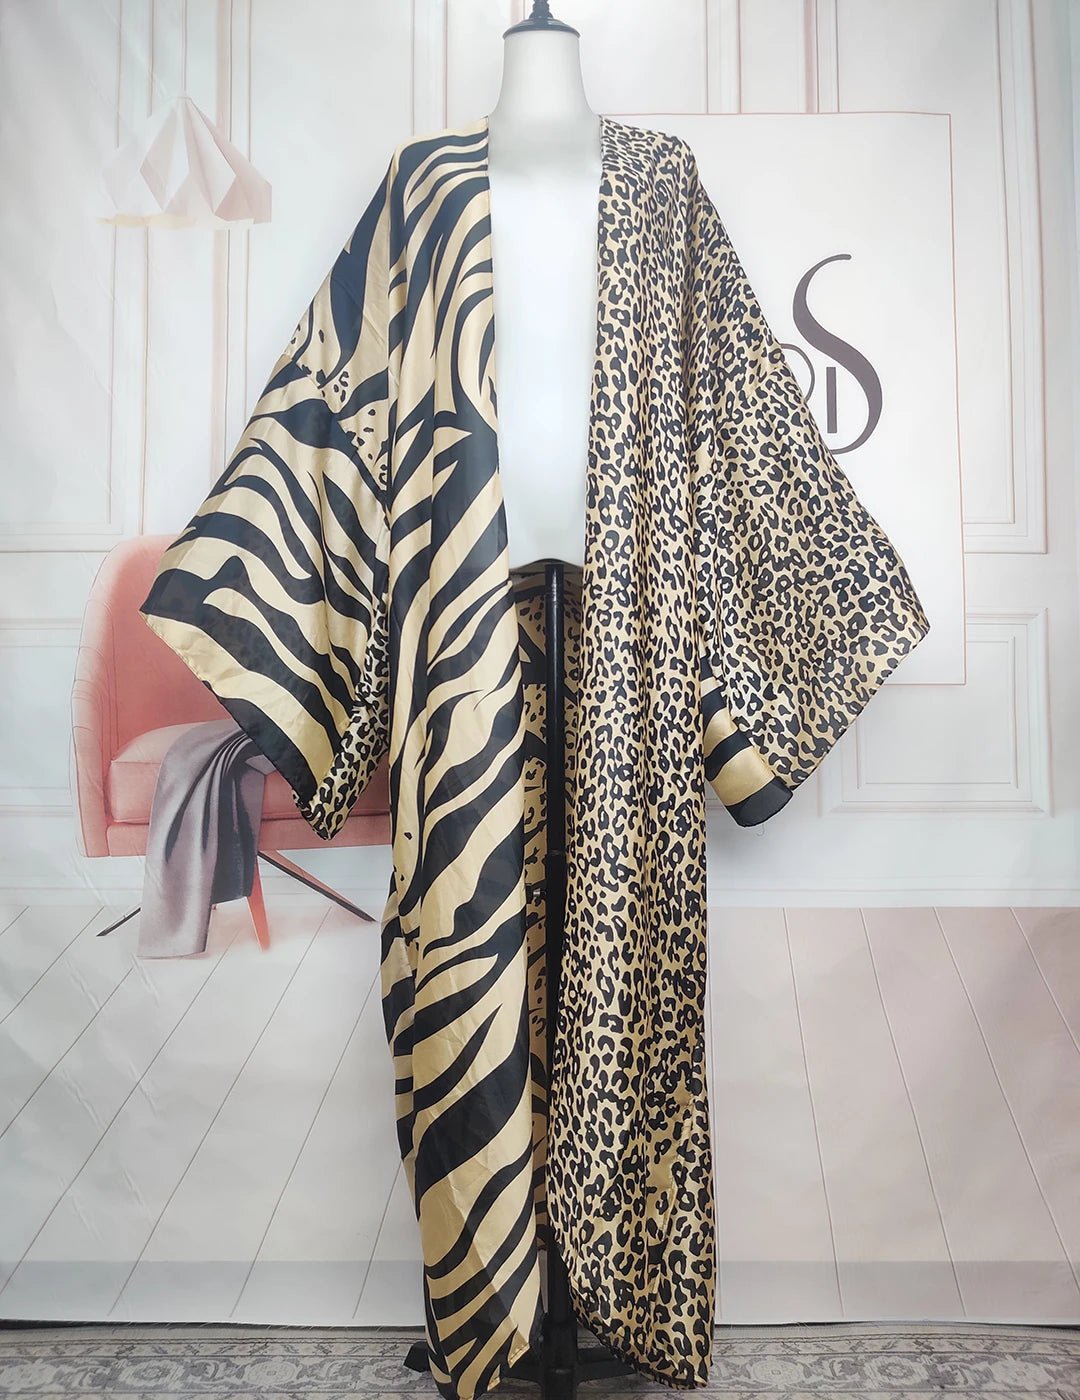 Chic Autumn Leopard Print Cardigans: Stylish Modesty and Swimwear for Women - Flexi Africa - Flexi Africa offers Free Delivery Worldwide - Vibrant African traditional clothing showcasing bold prints and intricate designs